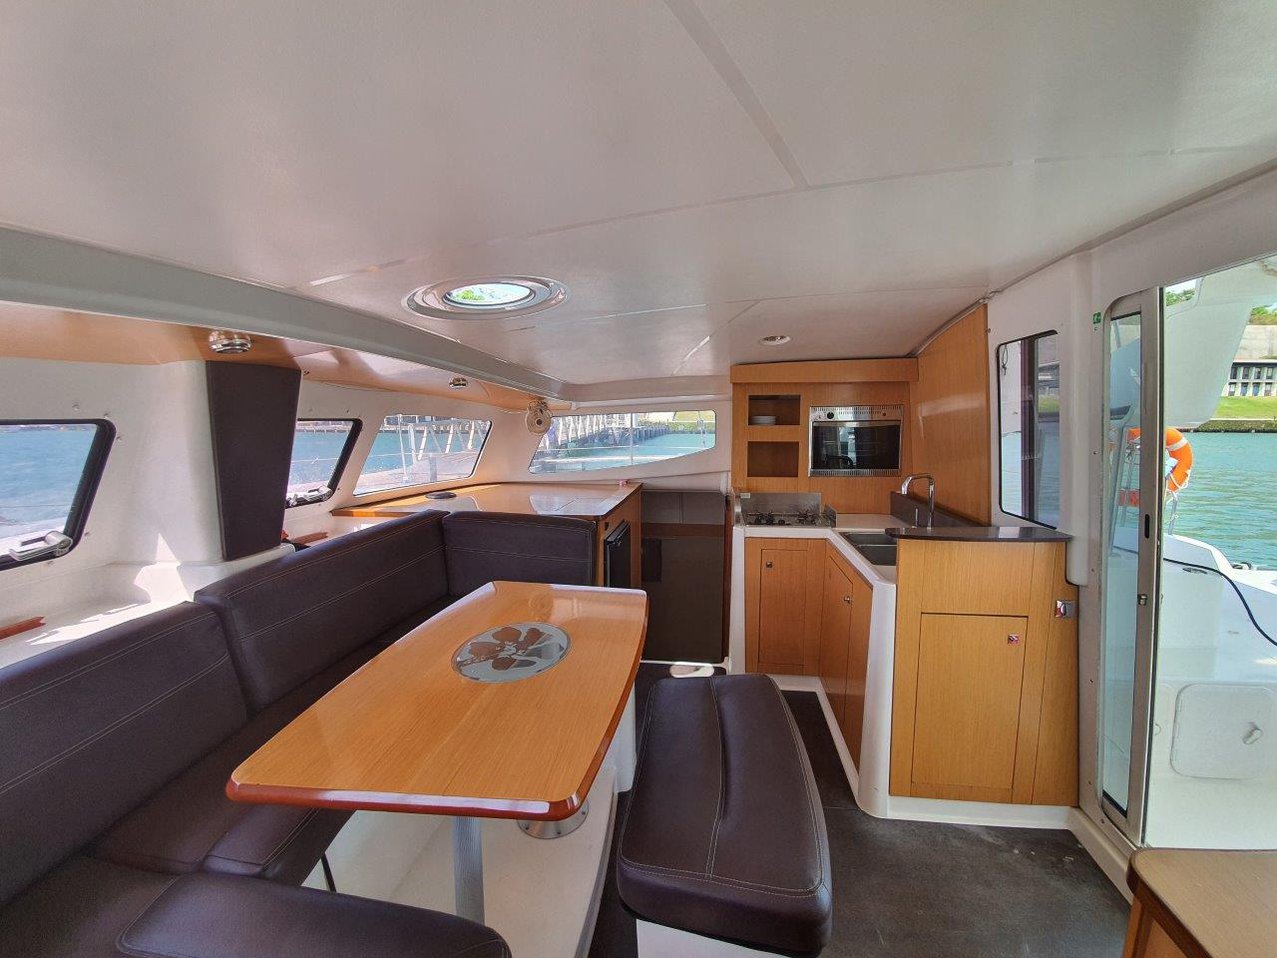 Mahe 36 - 3 cab. - Yacht Charter Queensland & Boat hire in Australia Queensland Whitsundays Coral Sea Marina 6